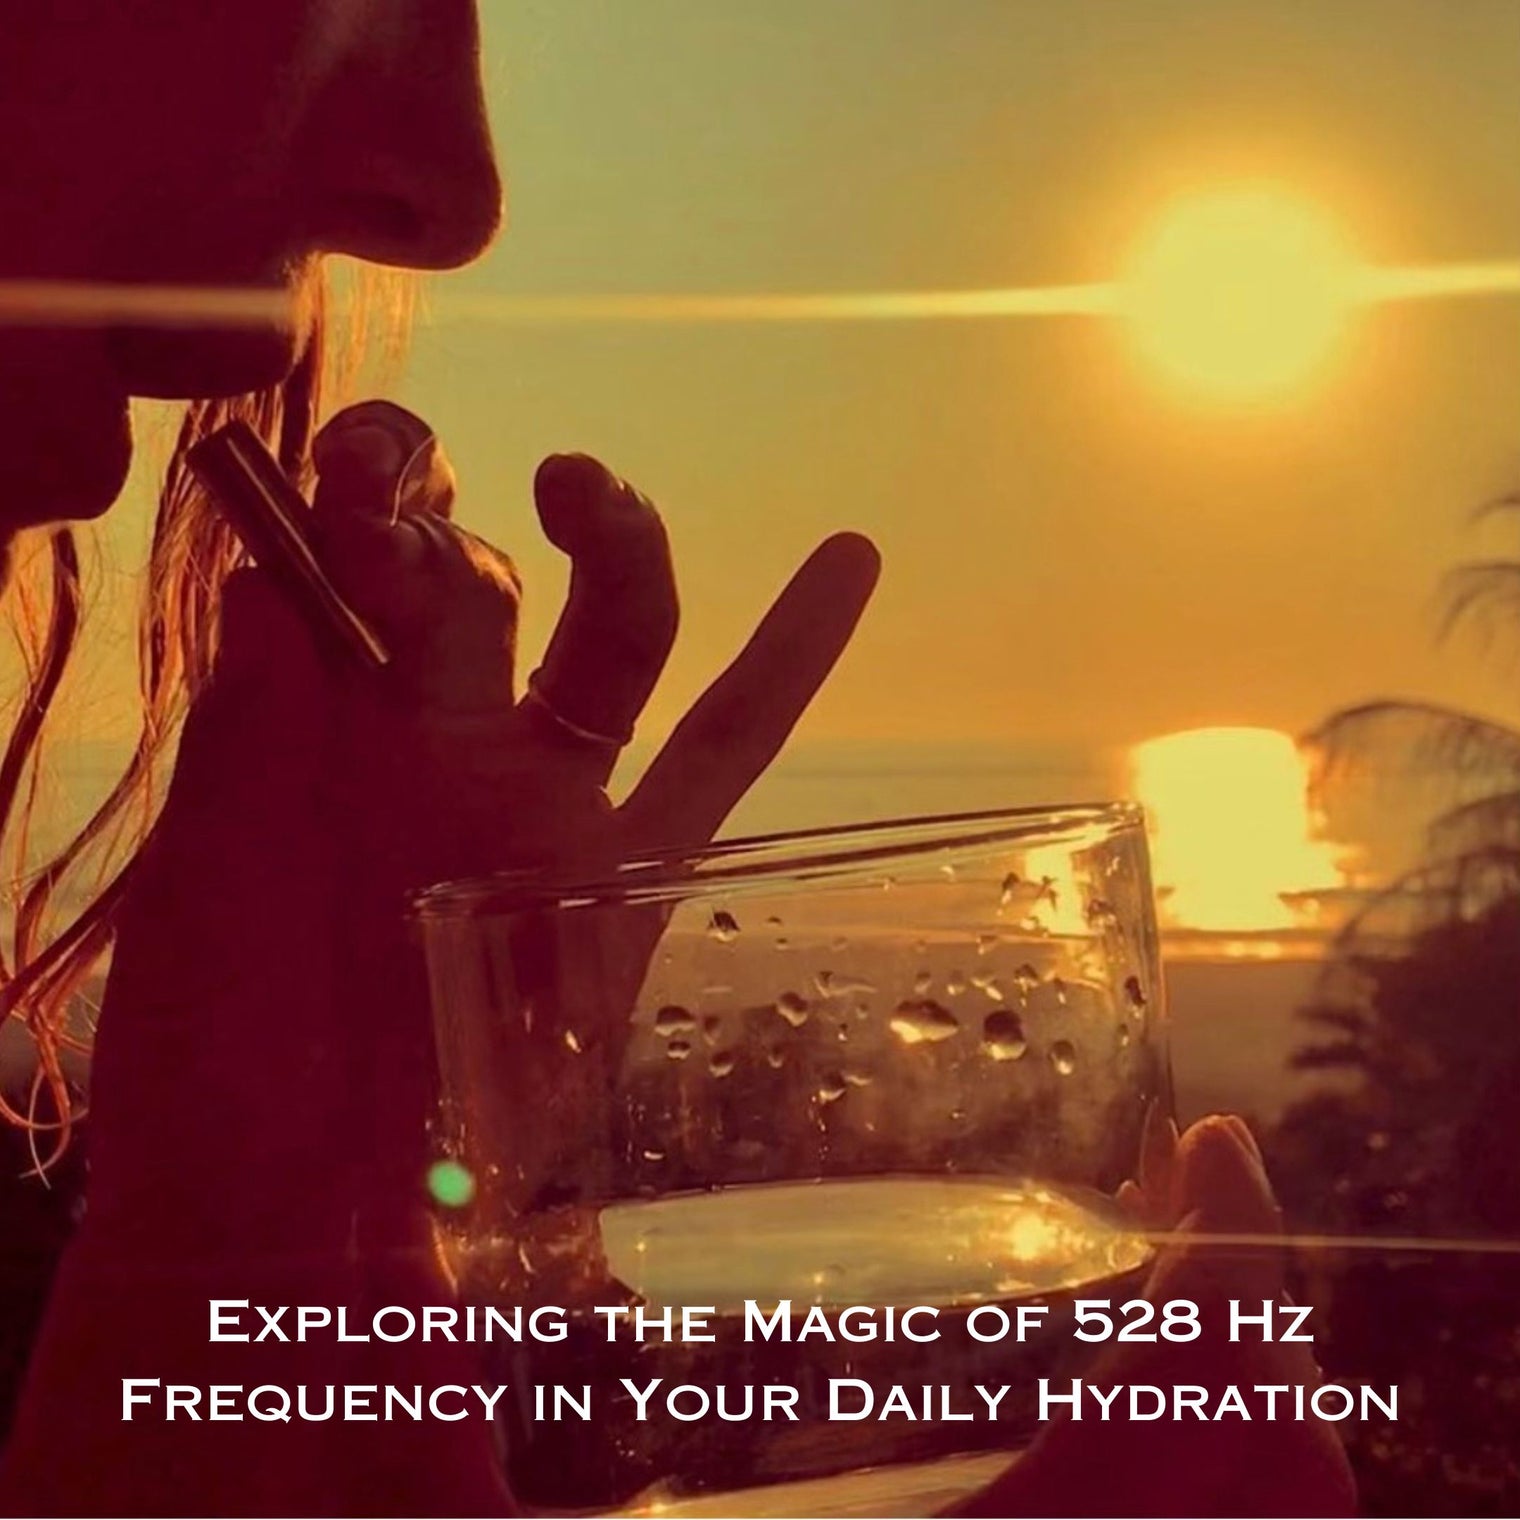 Exploring the Magic of 528 Hz Frequency in Your Daily Hydration